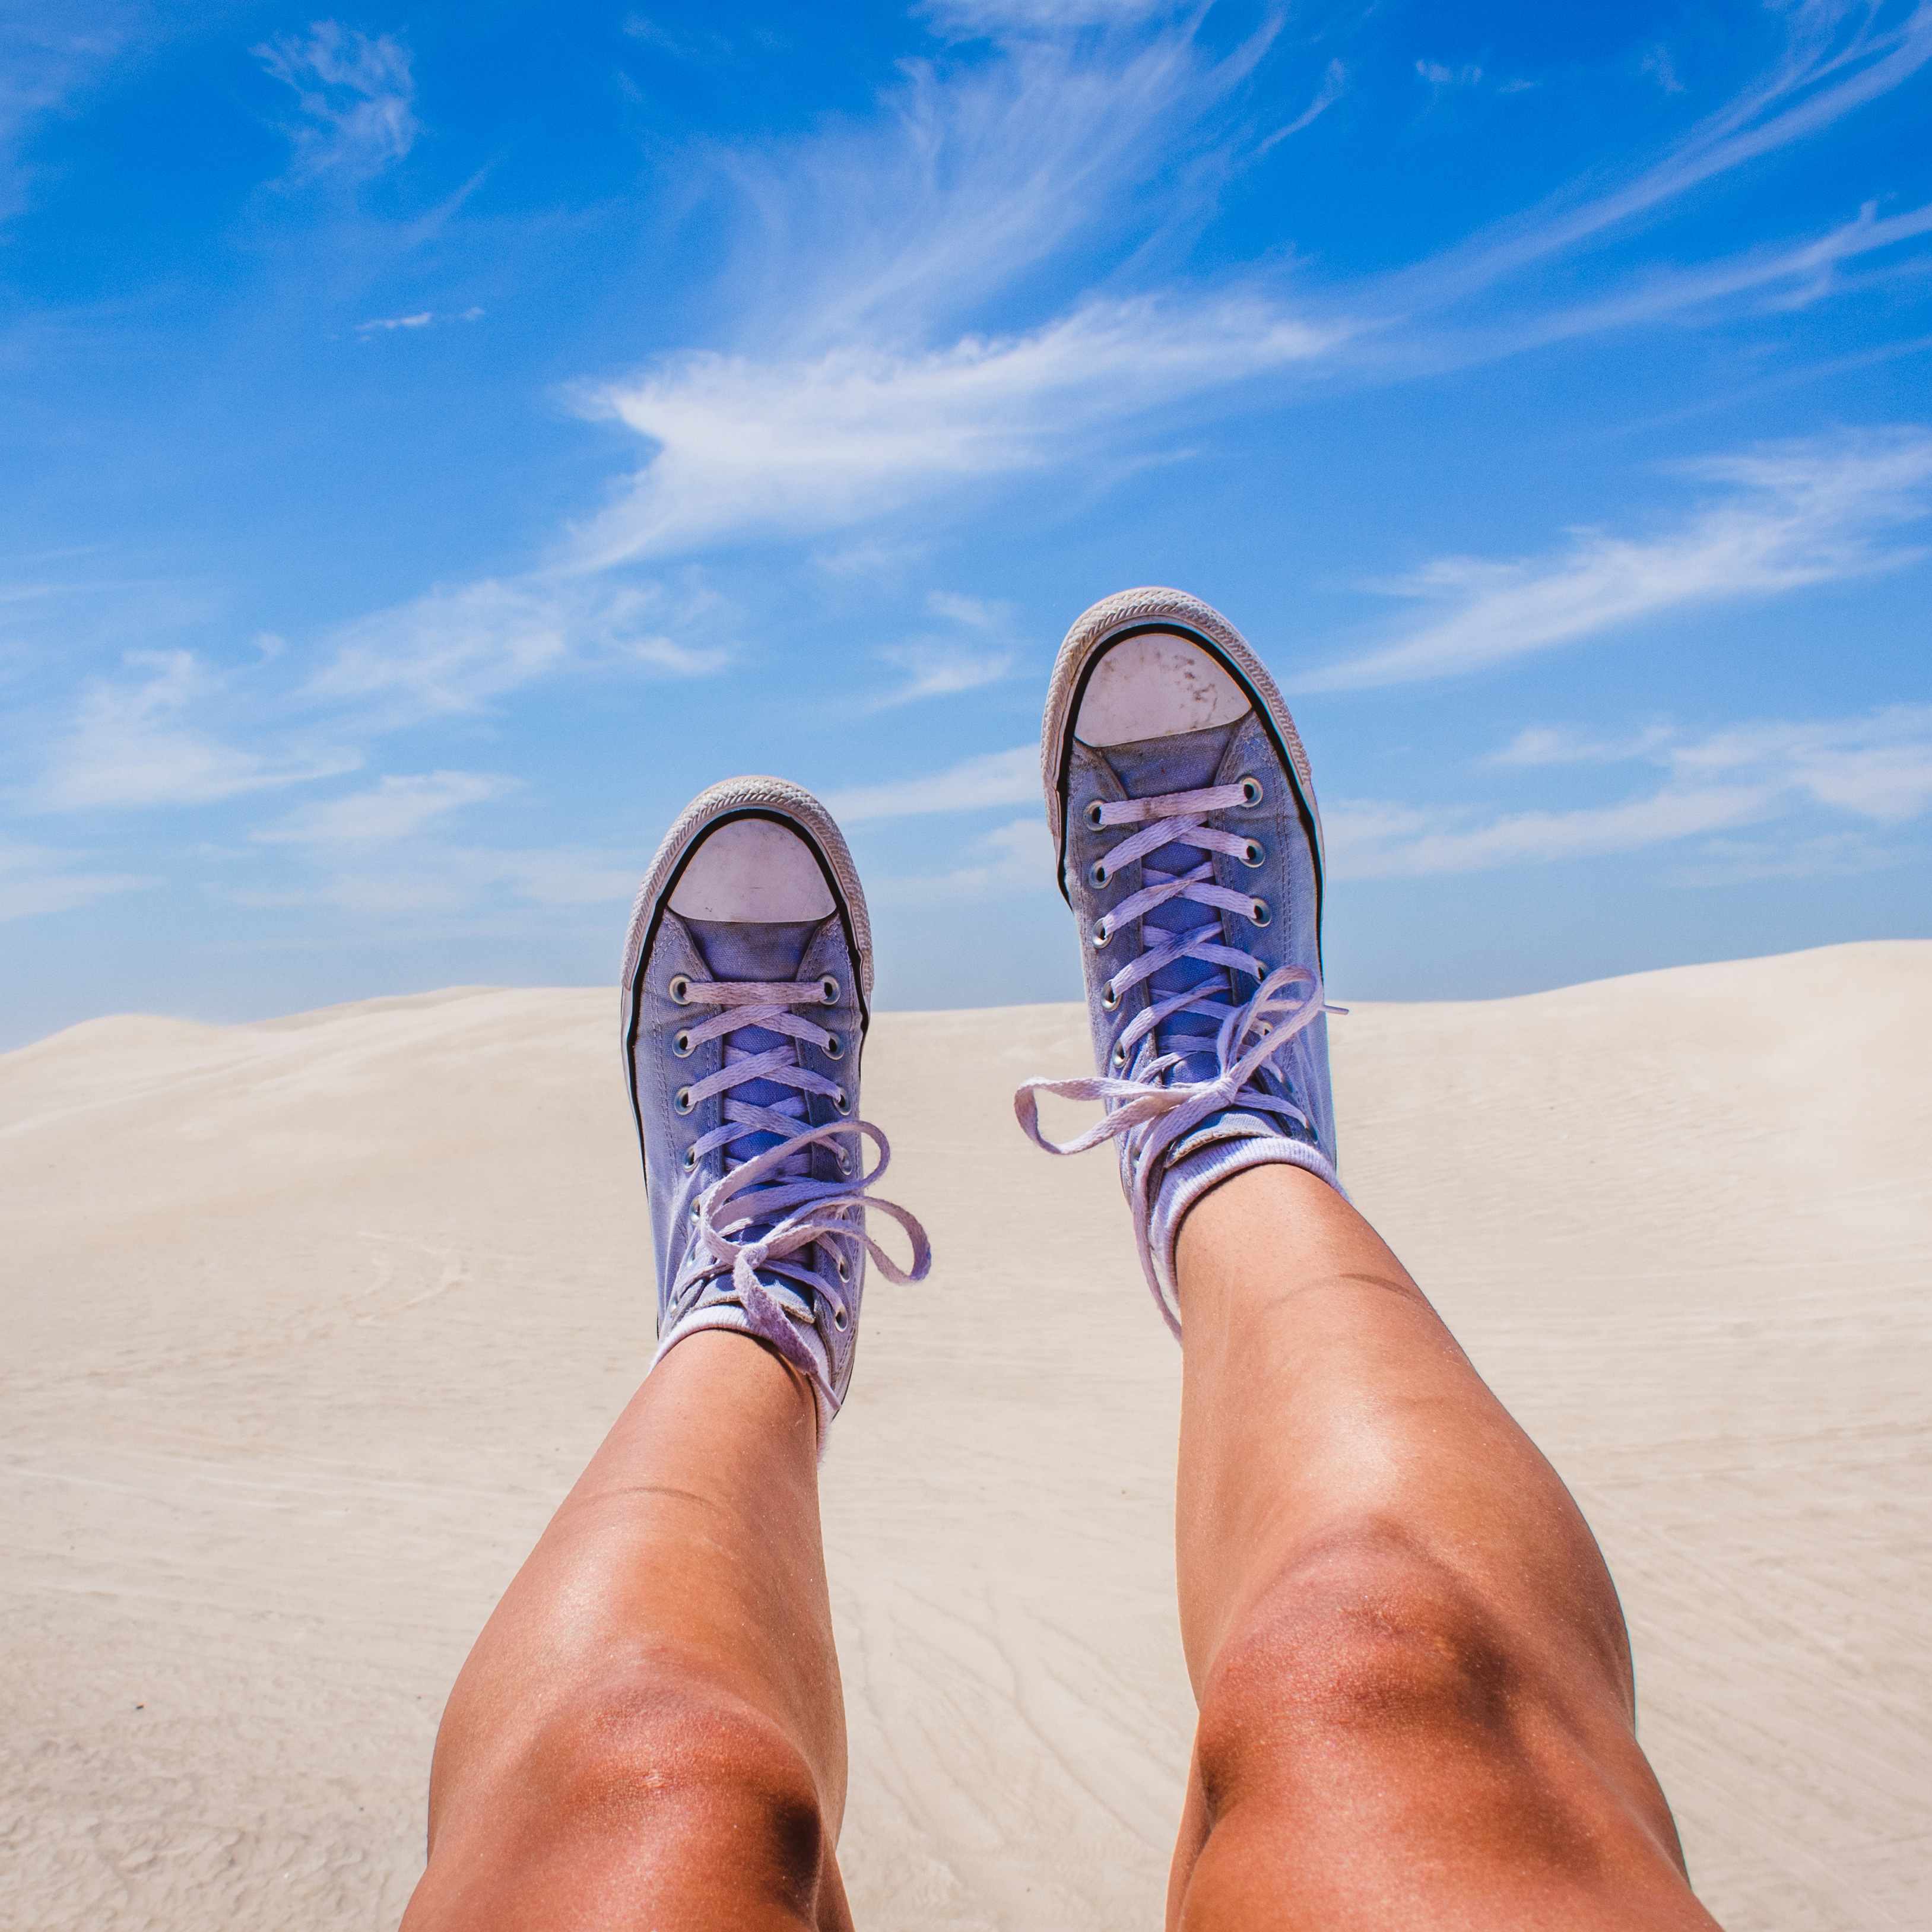 Point of view shot showing two legs in the air, with purple shoes, appearing above a desert dune.